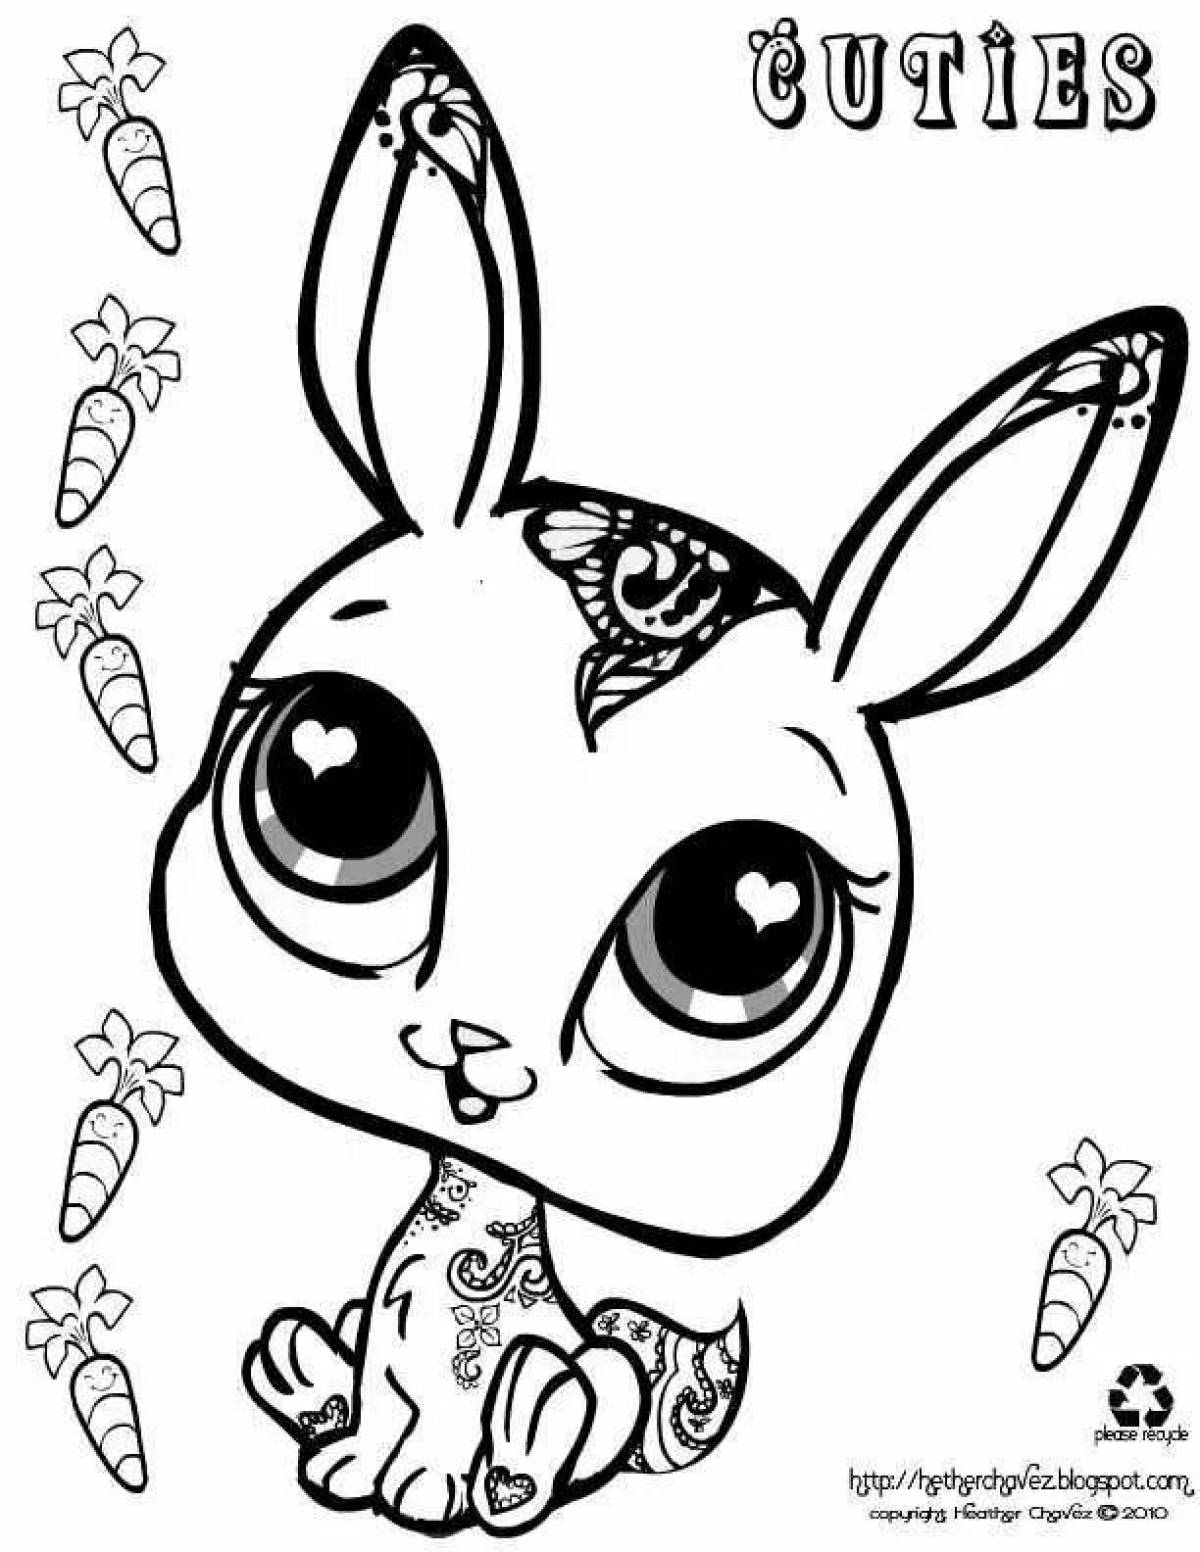 Cute and cuddly bunny coloring book